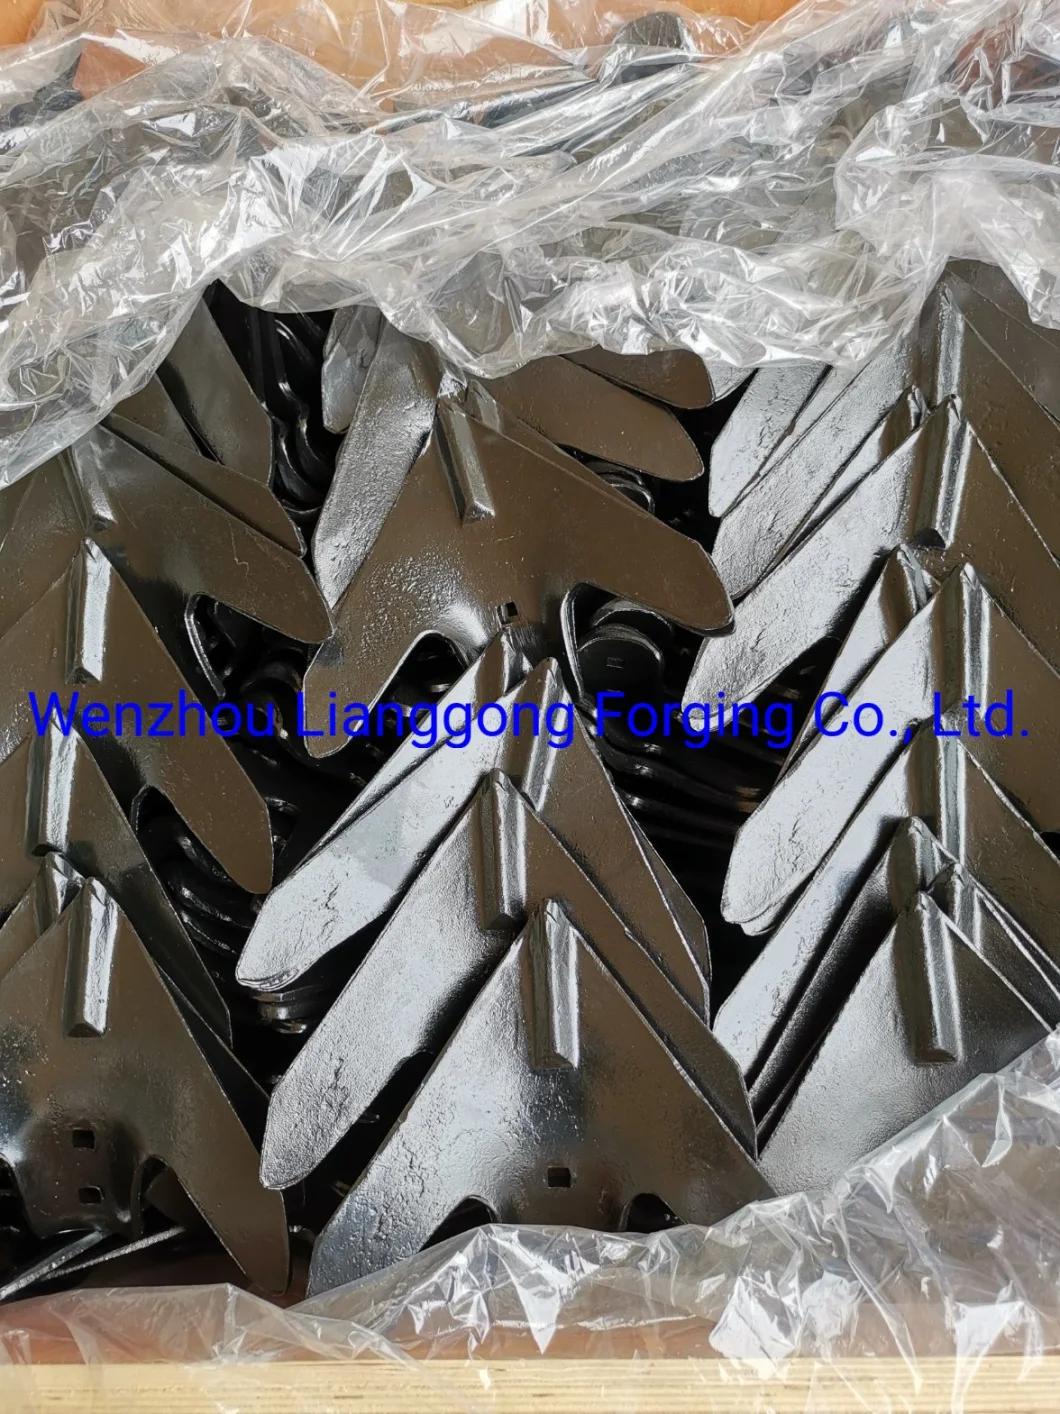 Adopt Hot Die Forging Process to Produce Automobile Spare Parts Construction Machinery Spare Parts Railway Spare Parts